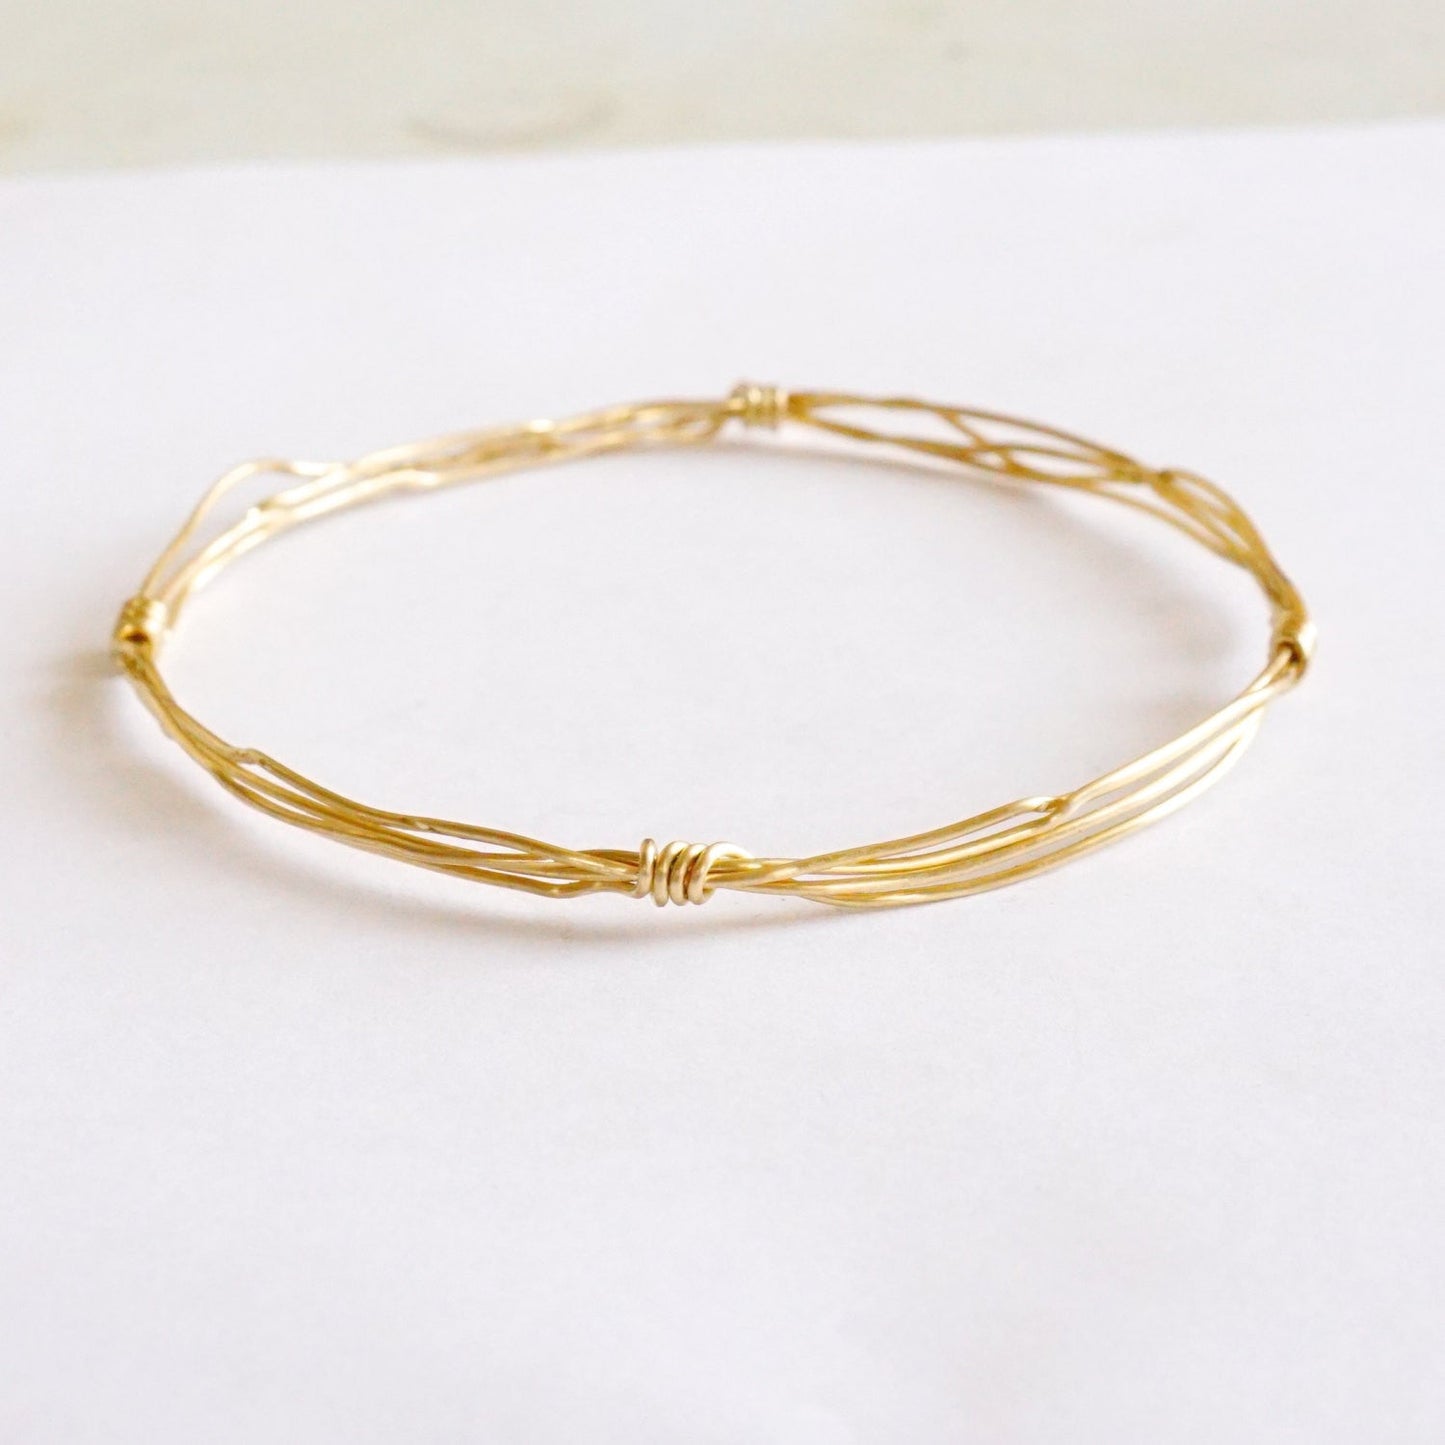 Stacking Wire Wrapped Bangle Bracelet 008 - Patination Design